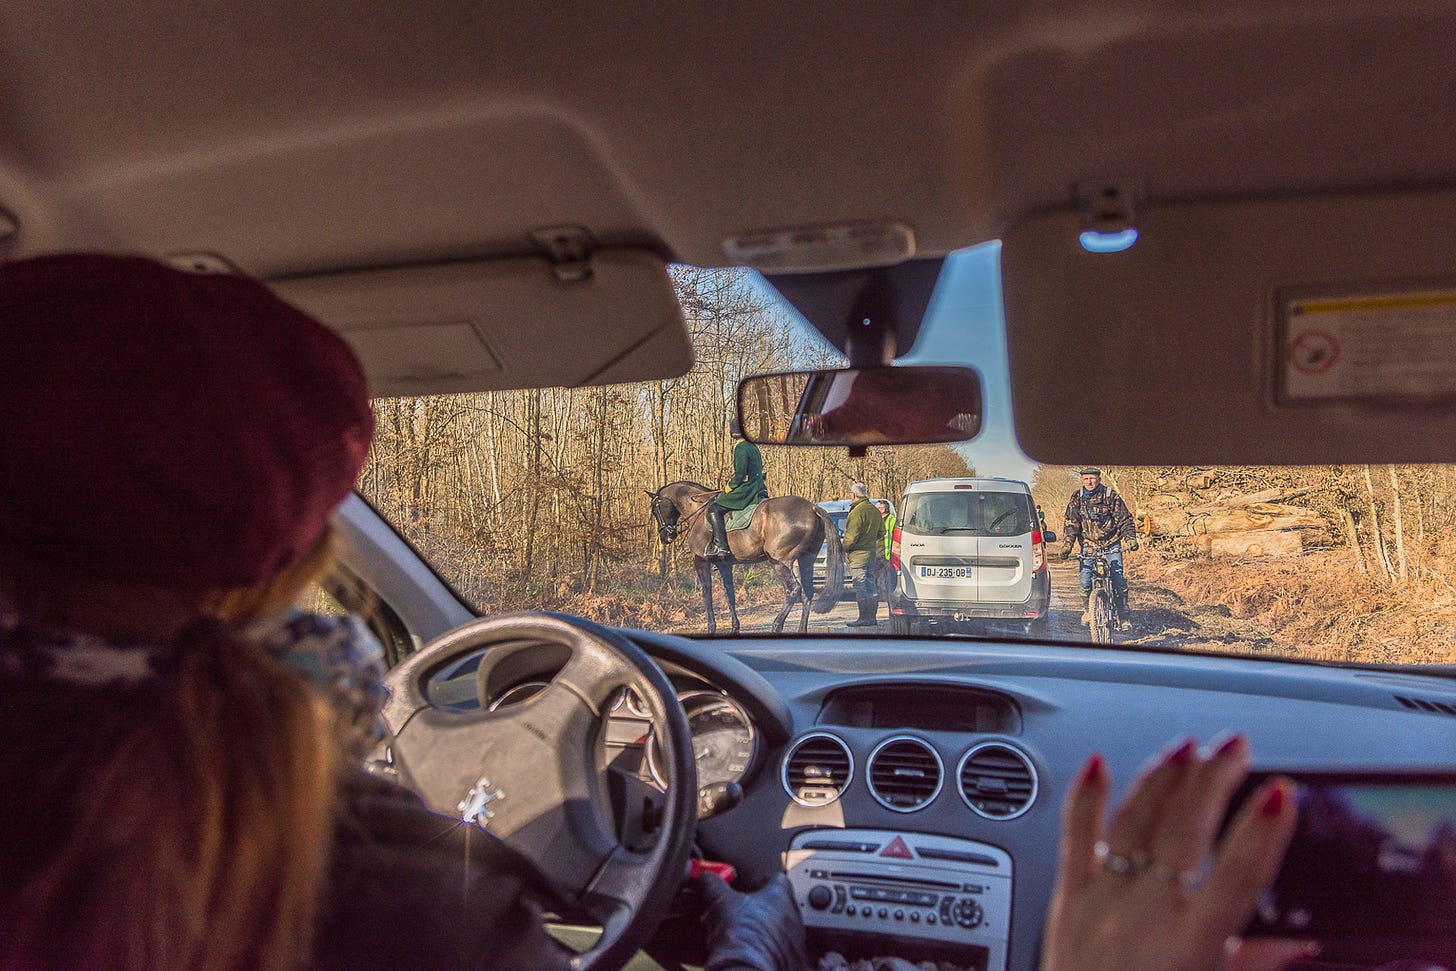 Hunt and supporters blocking a road. The view is from inside a hunt saboteur's car.